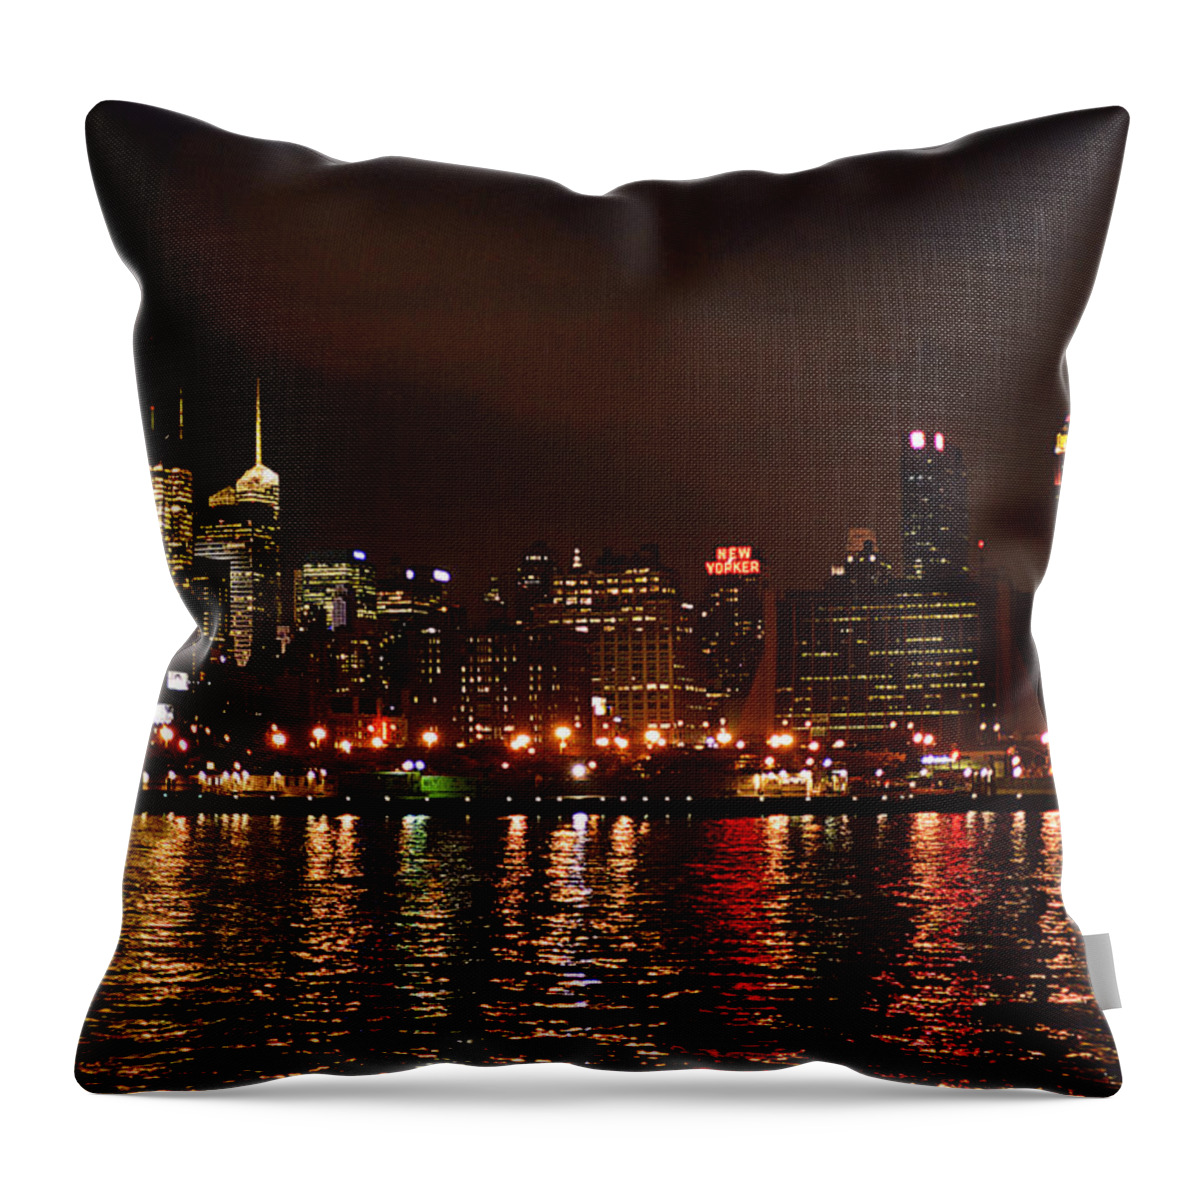 Rhapsody In Blue Throw Pillow featuring the photograph Rhapsody in Blue by William Fields